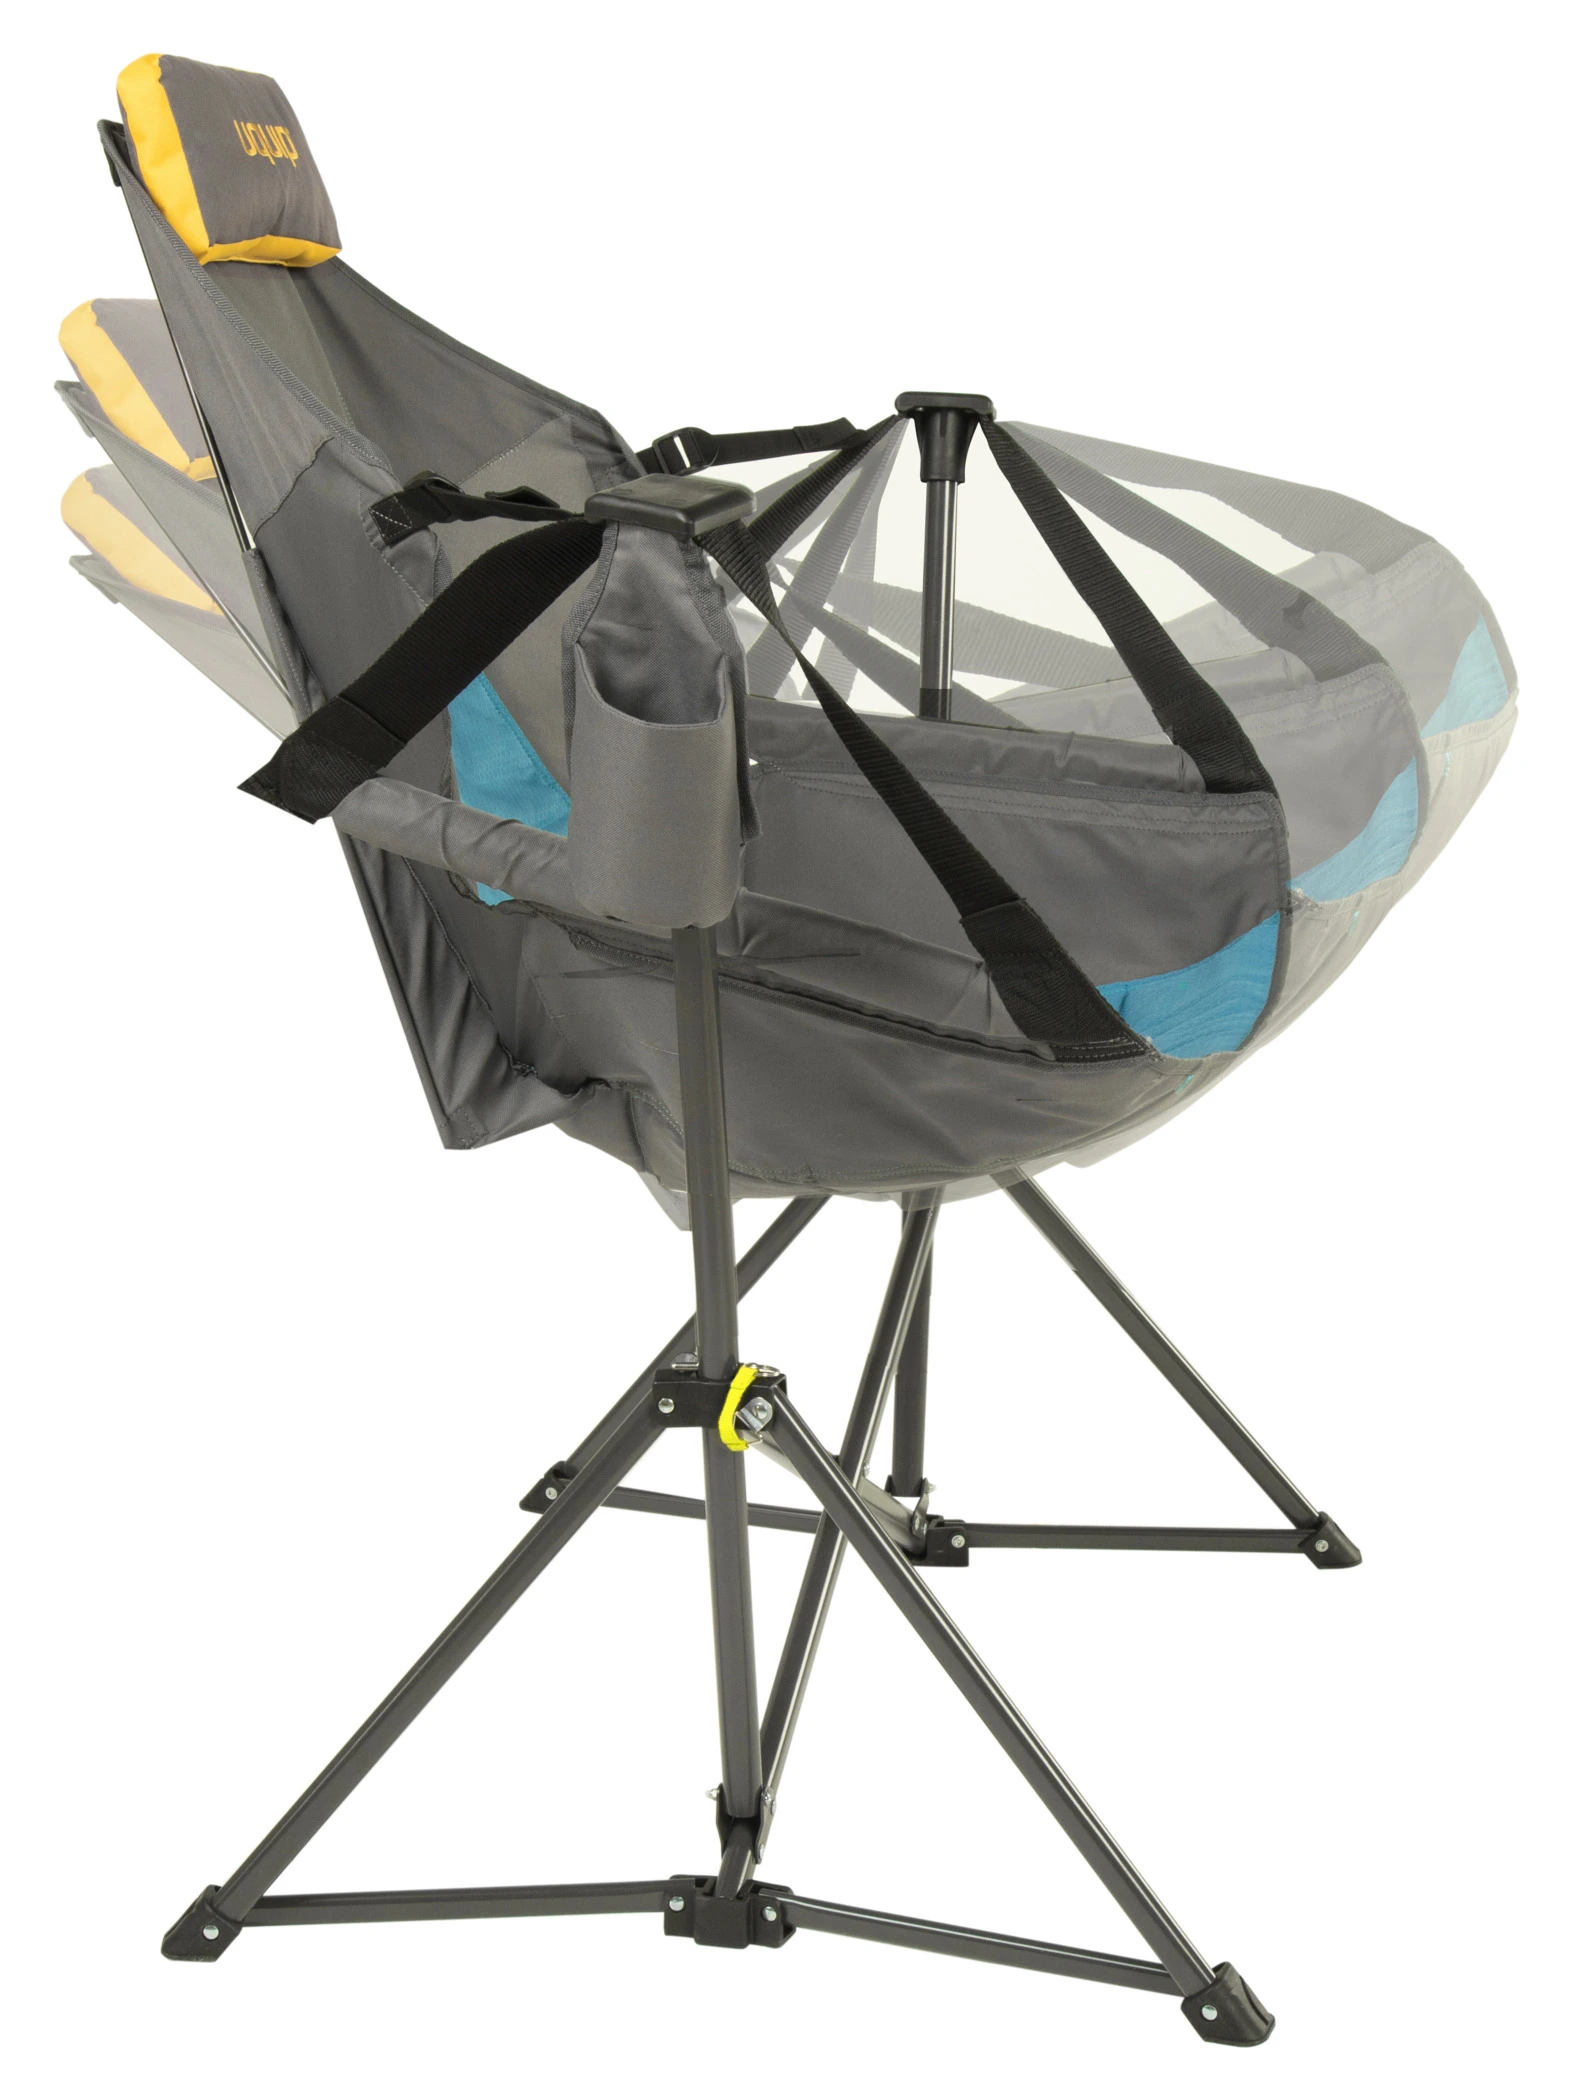 UQUIP ROCKY CAMPING CHAIR